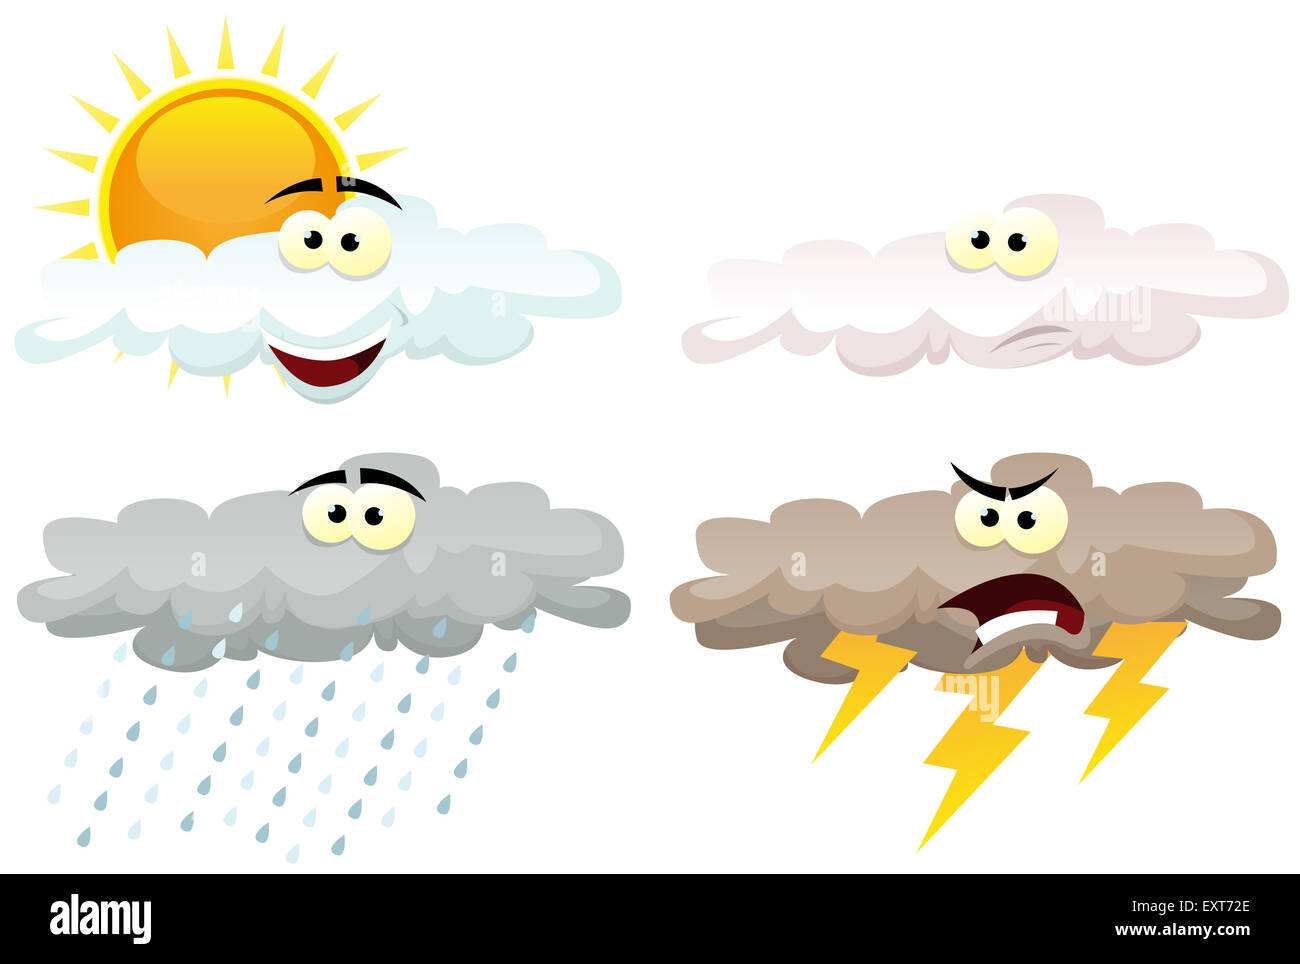 Illustration of a set of various cartoon funny weather symbol icons characters with shining sun, clouds characters, rain Stock Photo